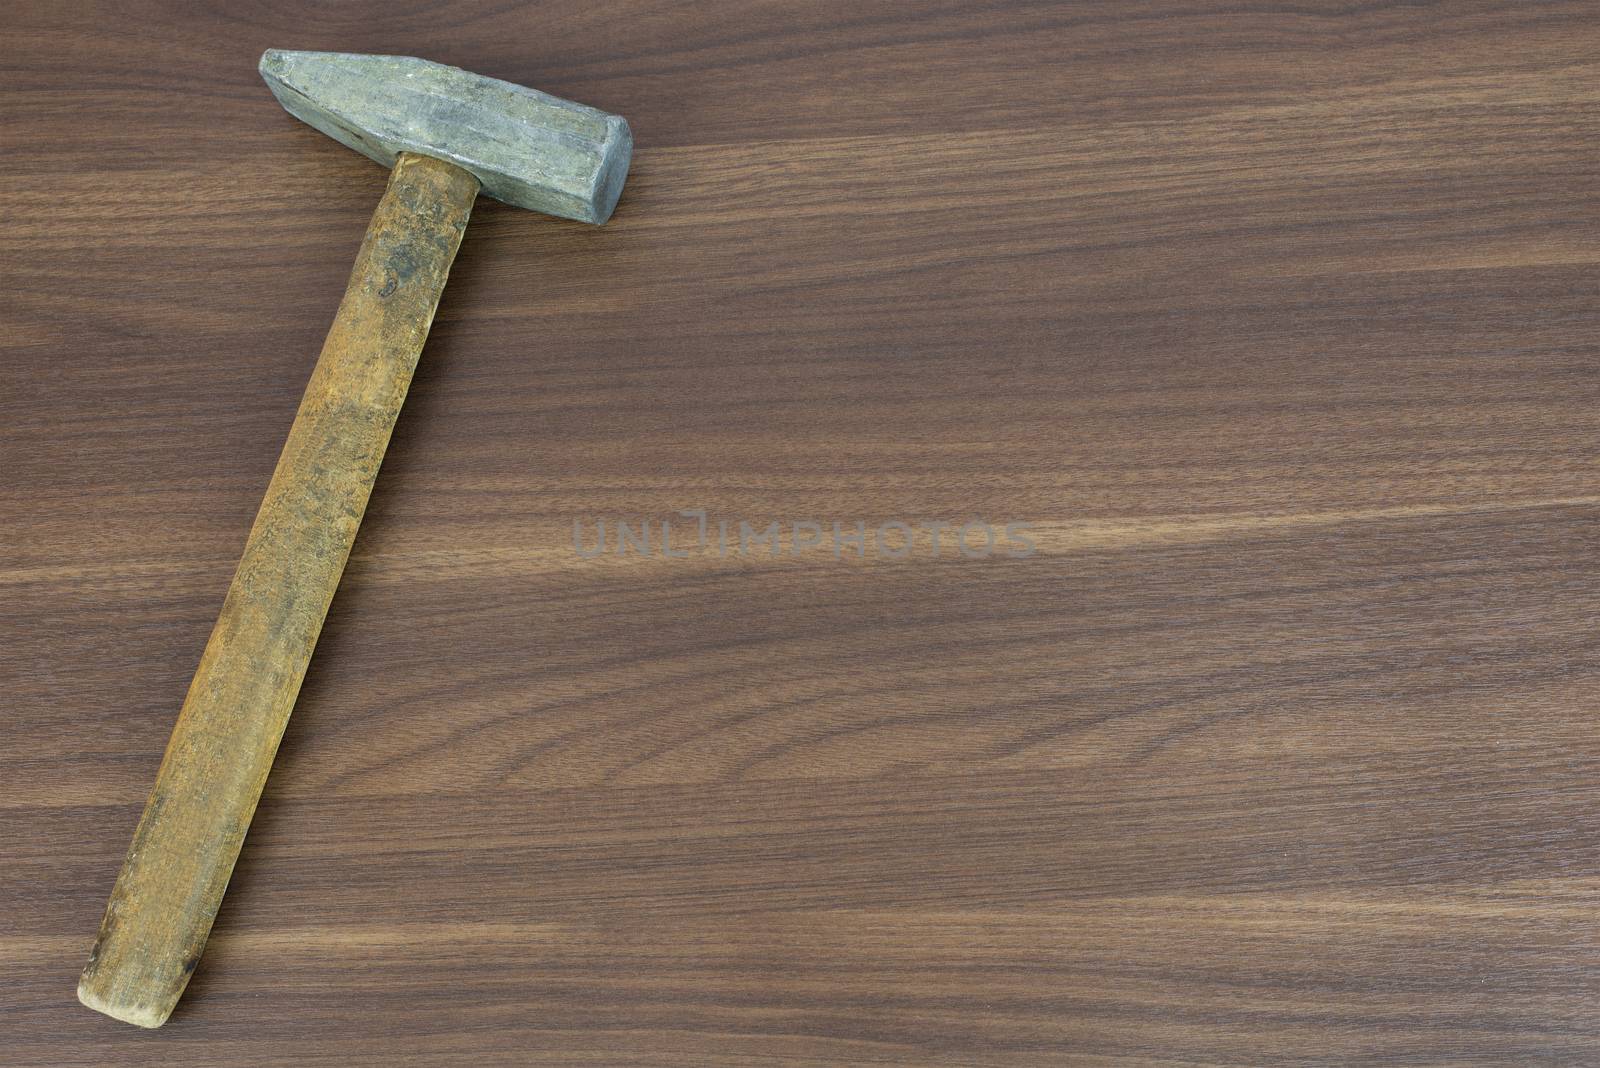 Old hammer on a wooden surface. carpenter tools